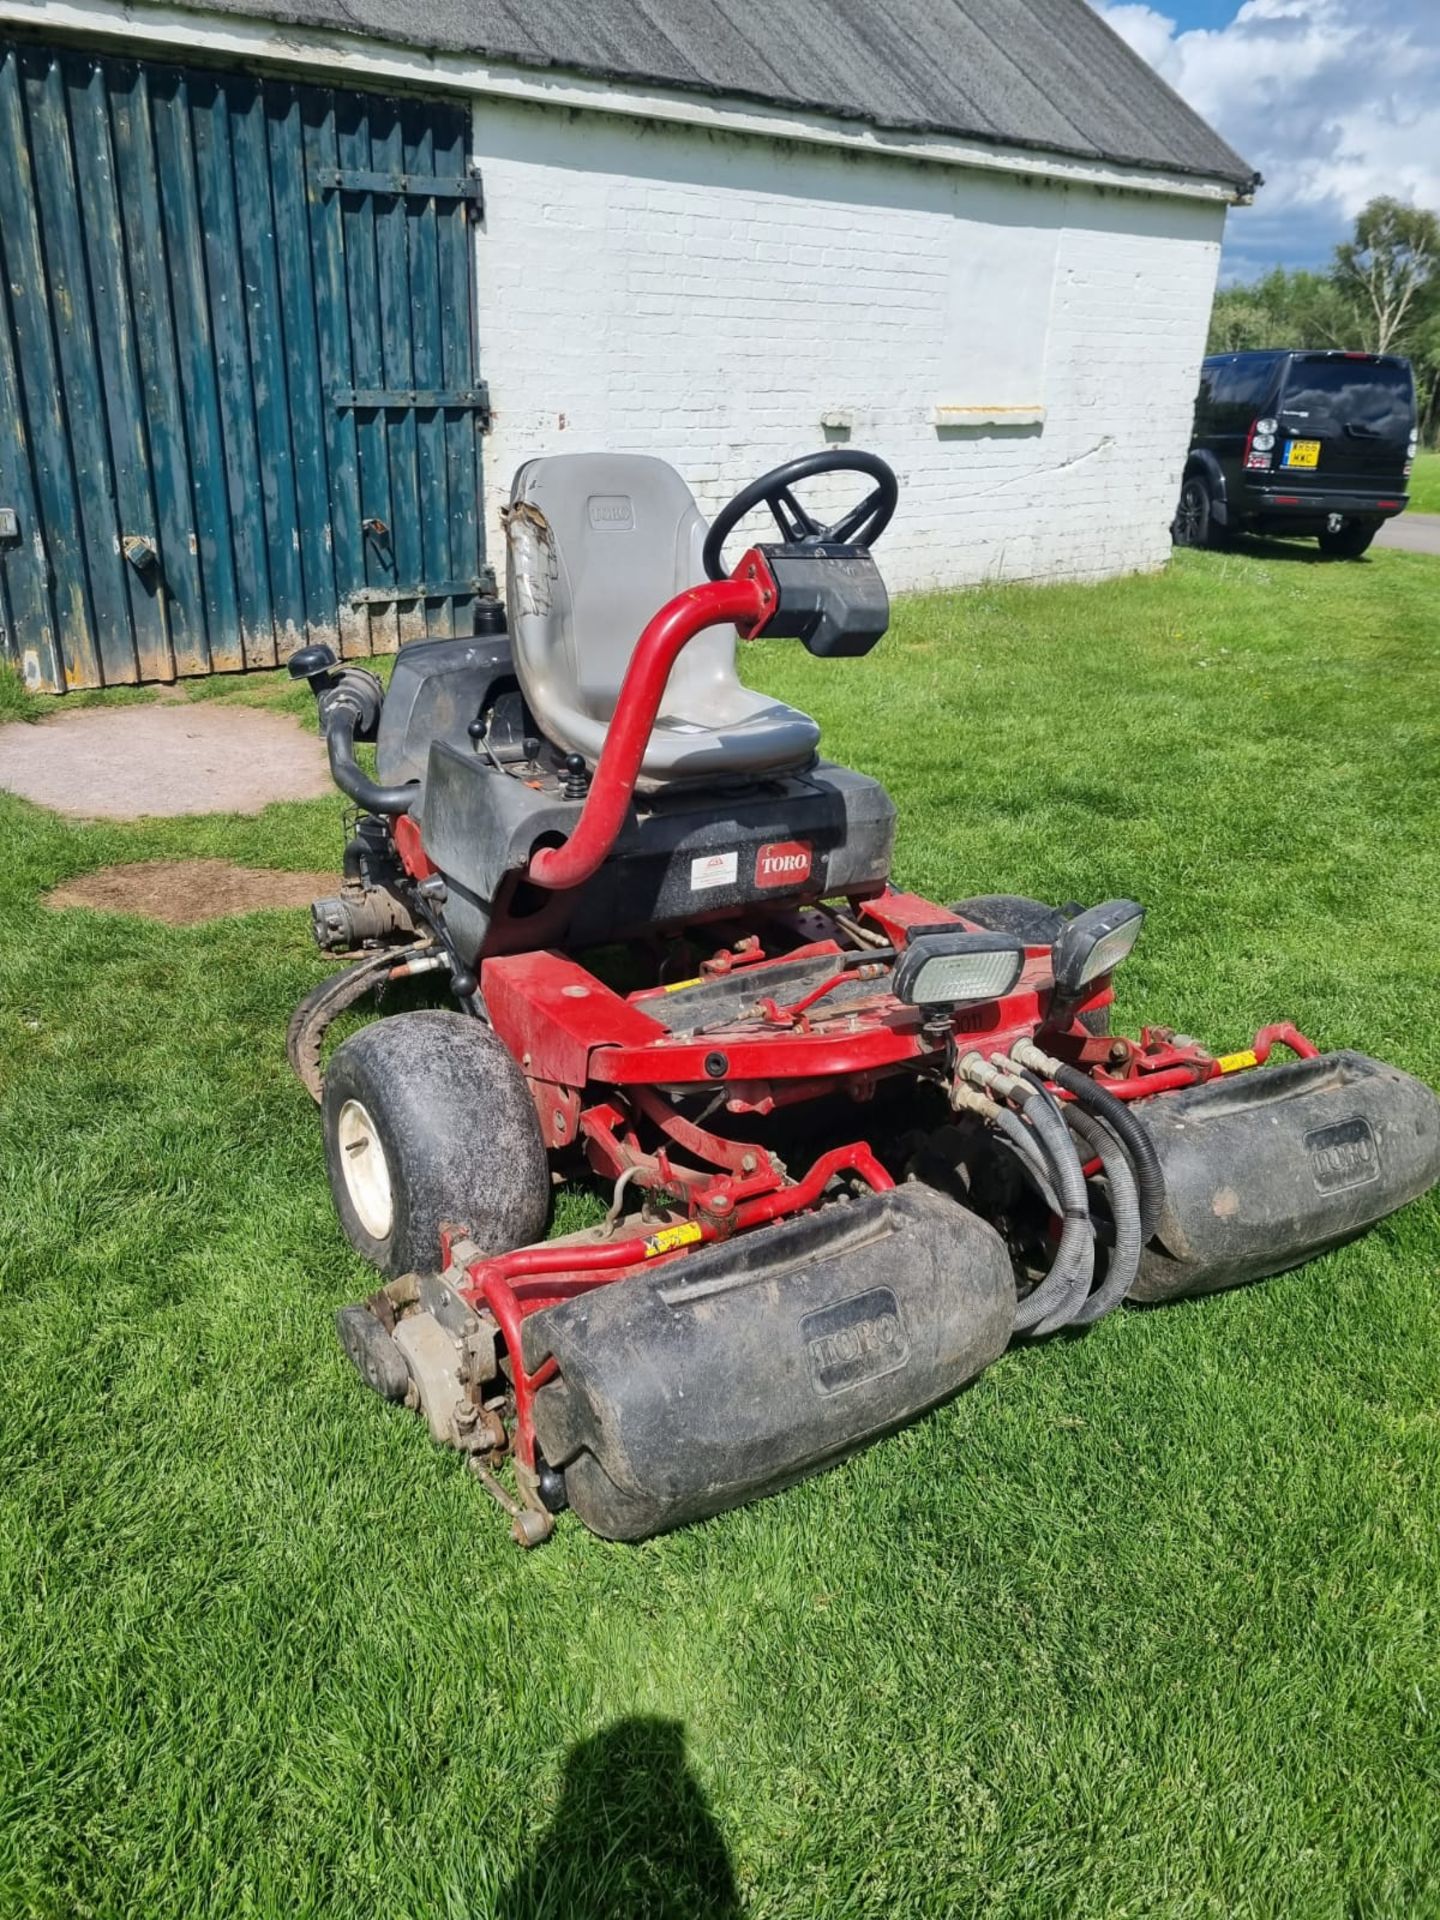 Toro Greensmaster 3250-D Mower YOM 2008 Hours 4121.6 (s/n 3632800001129) Features Briggs & - Image 2 of 10